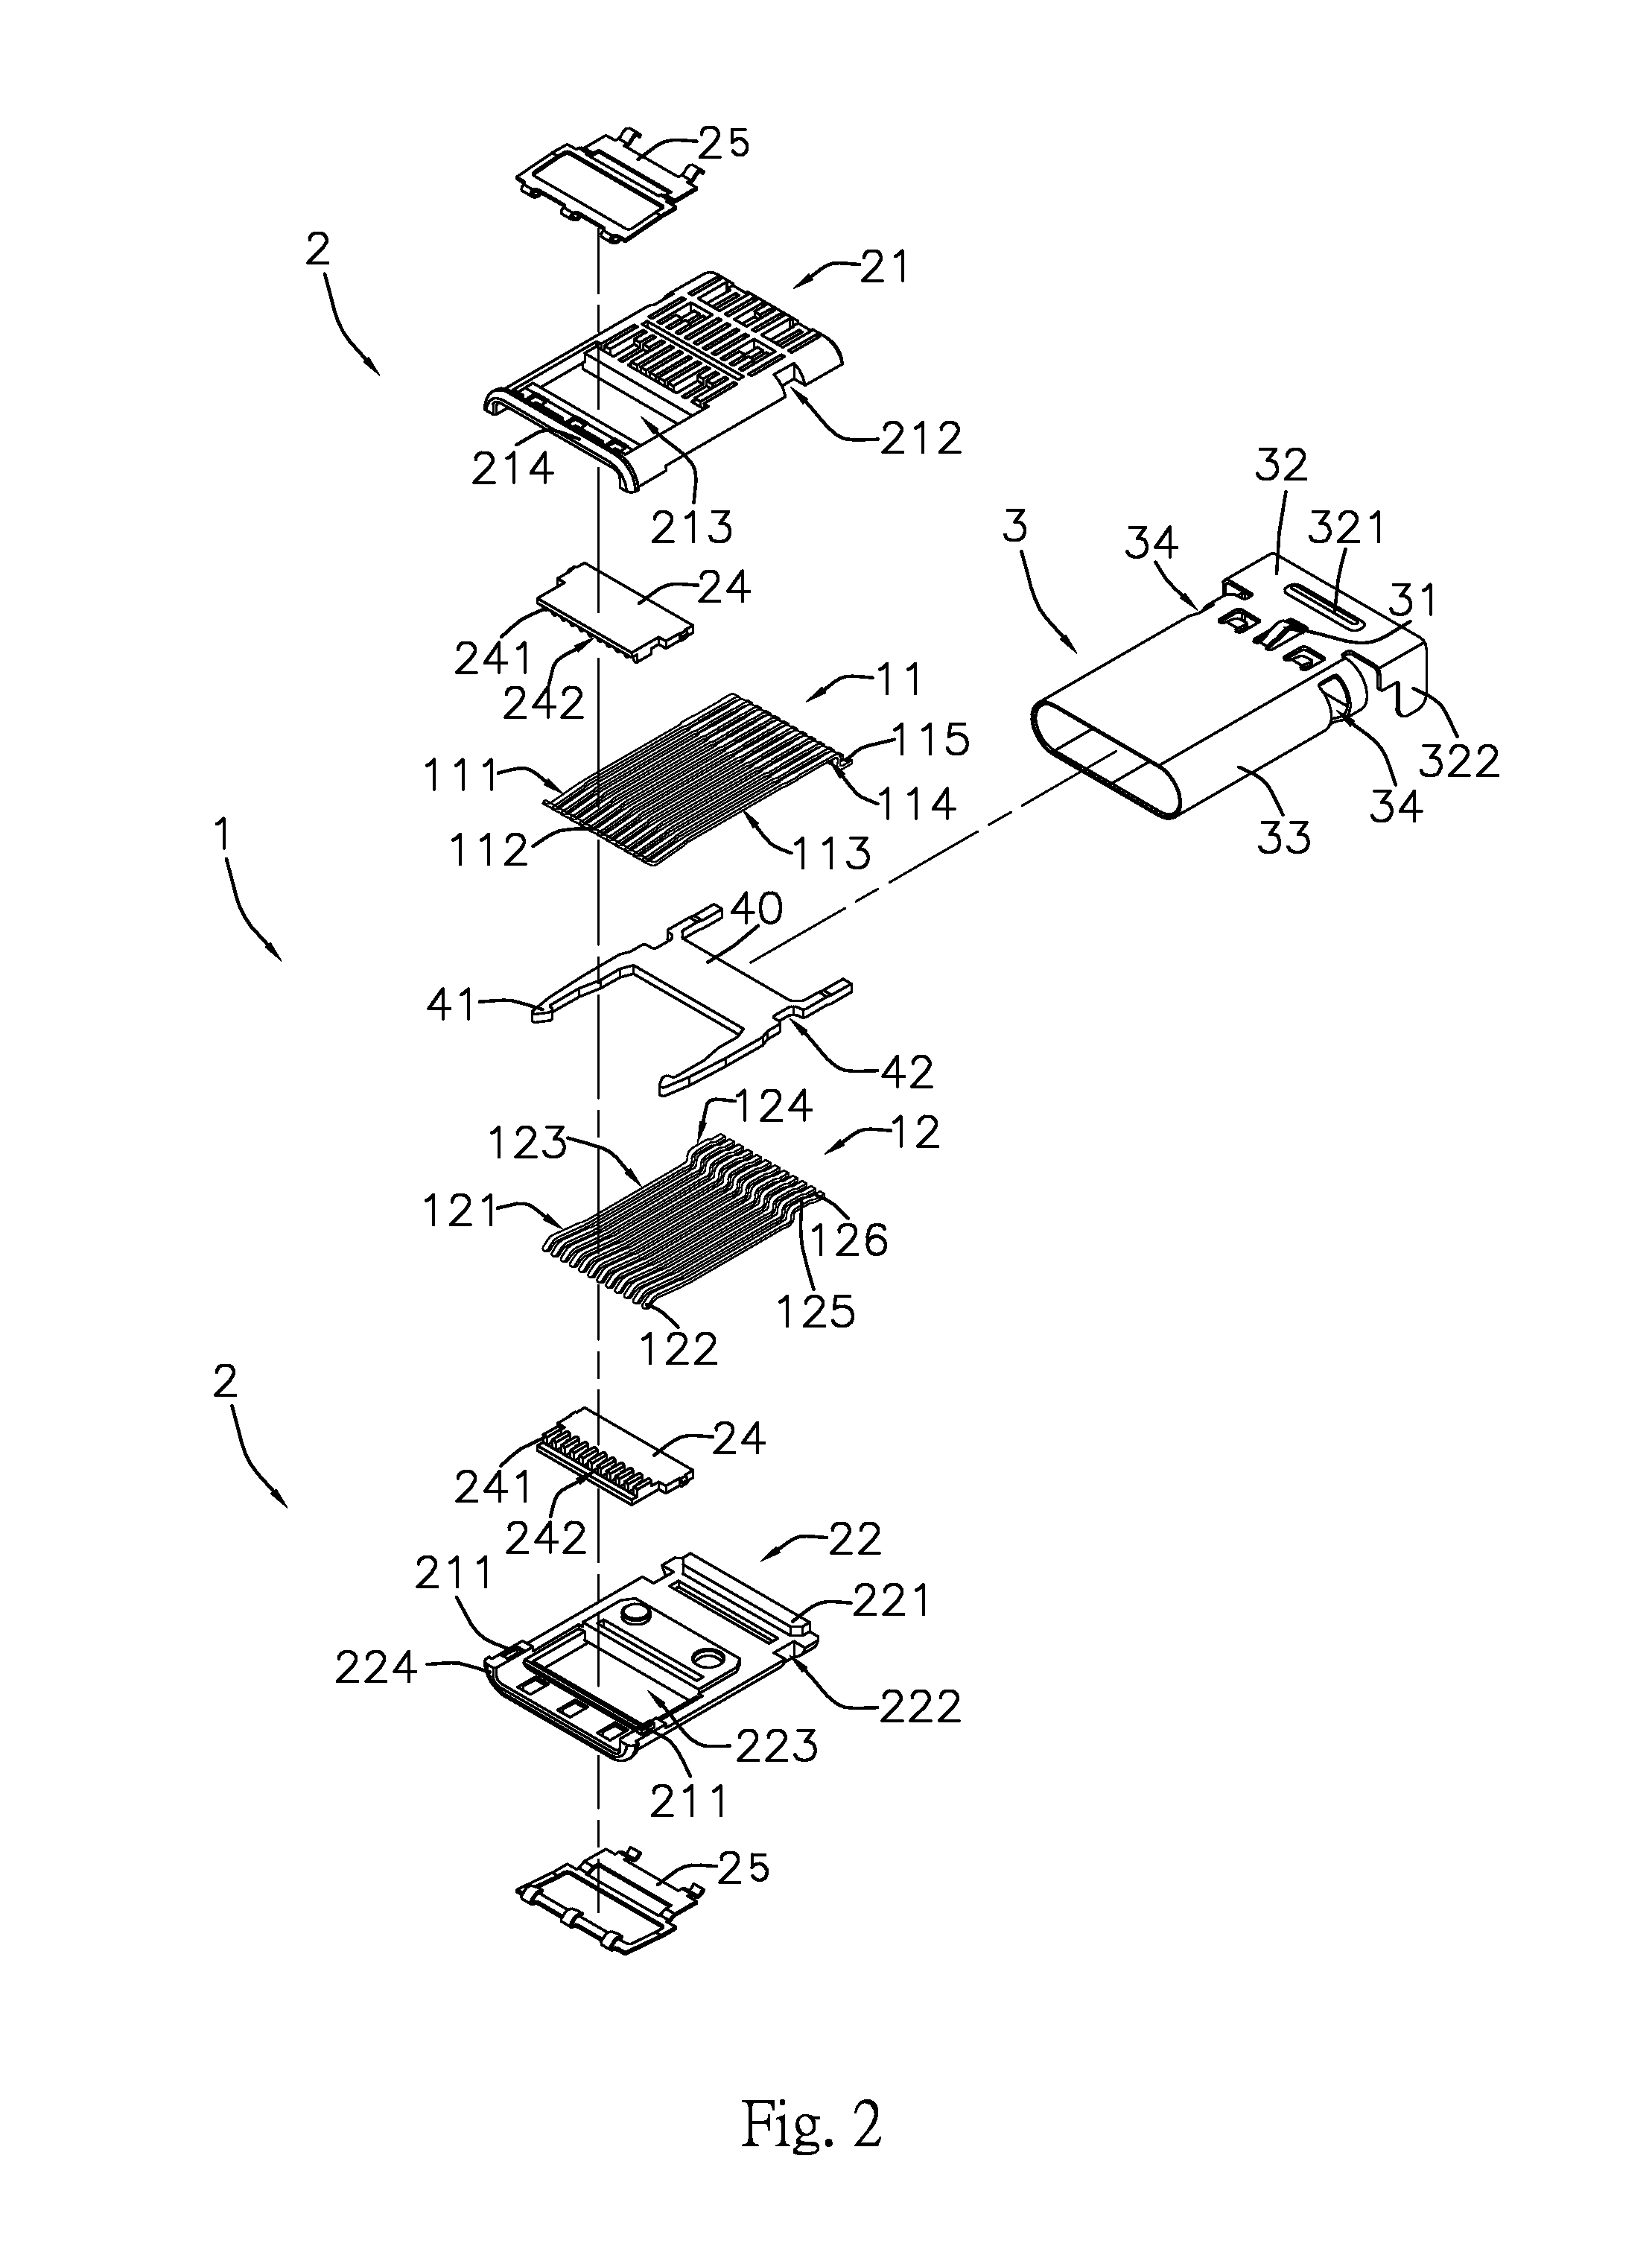 Receptacle structure